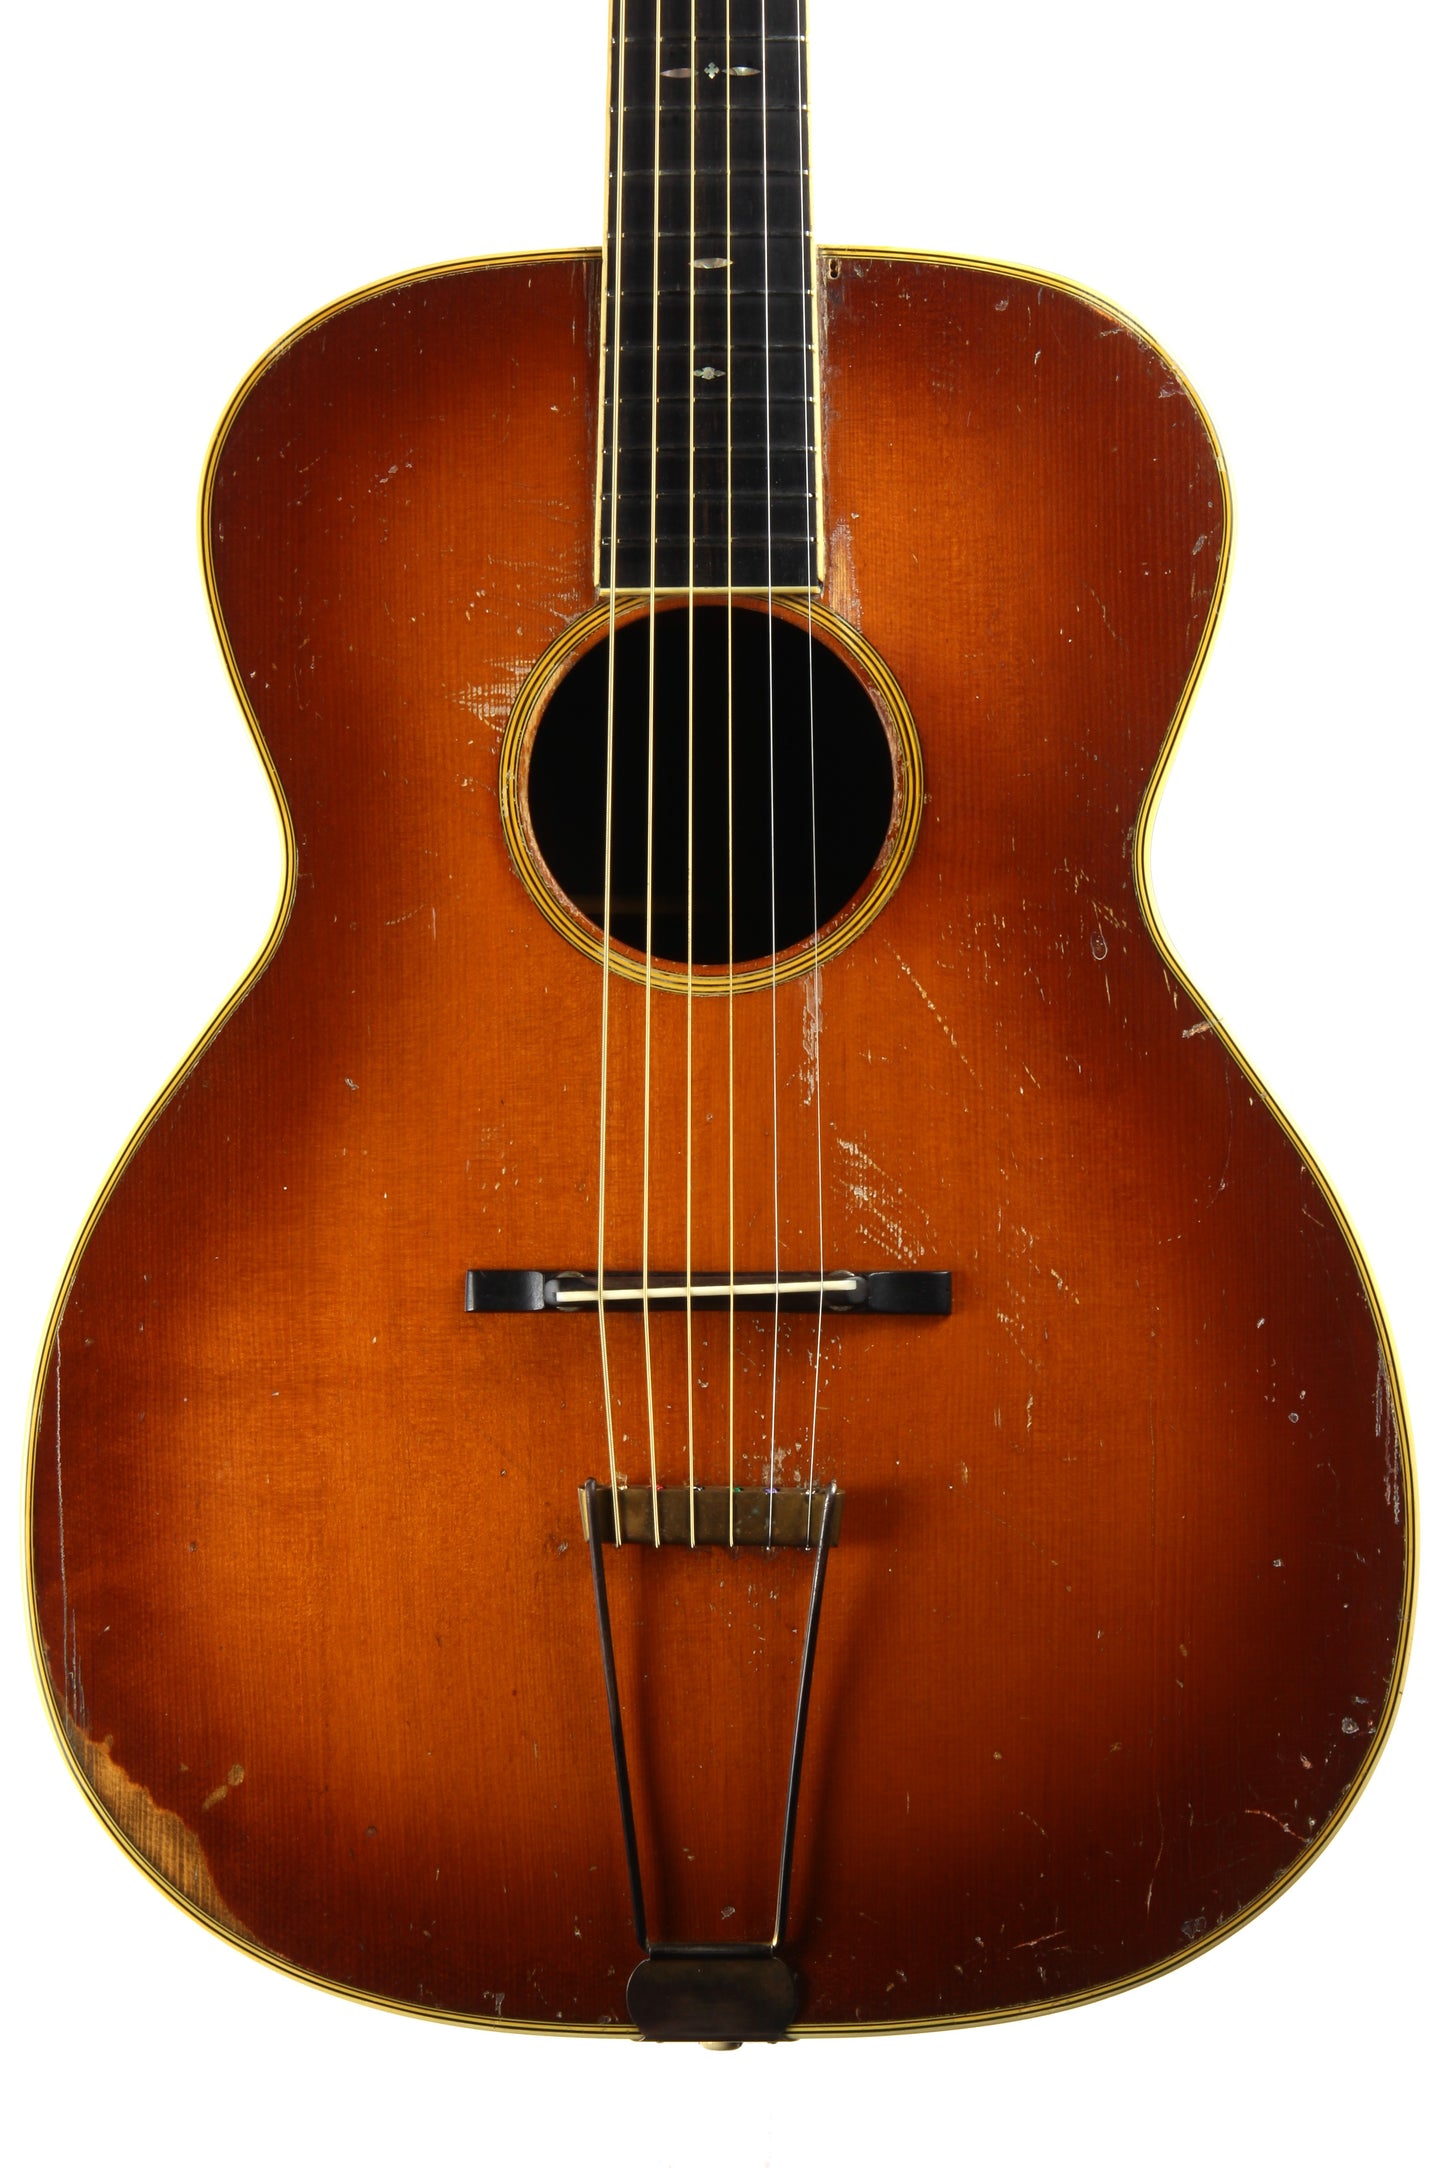 1931 Martin C-3 OM 000 Archtop - One Owner w/ Picture! - Brazilian Rosewood - Original Case - Shaded Top